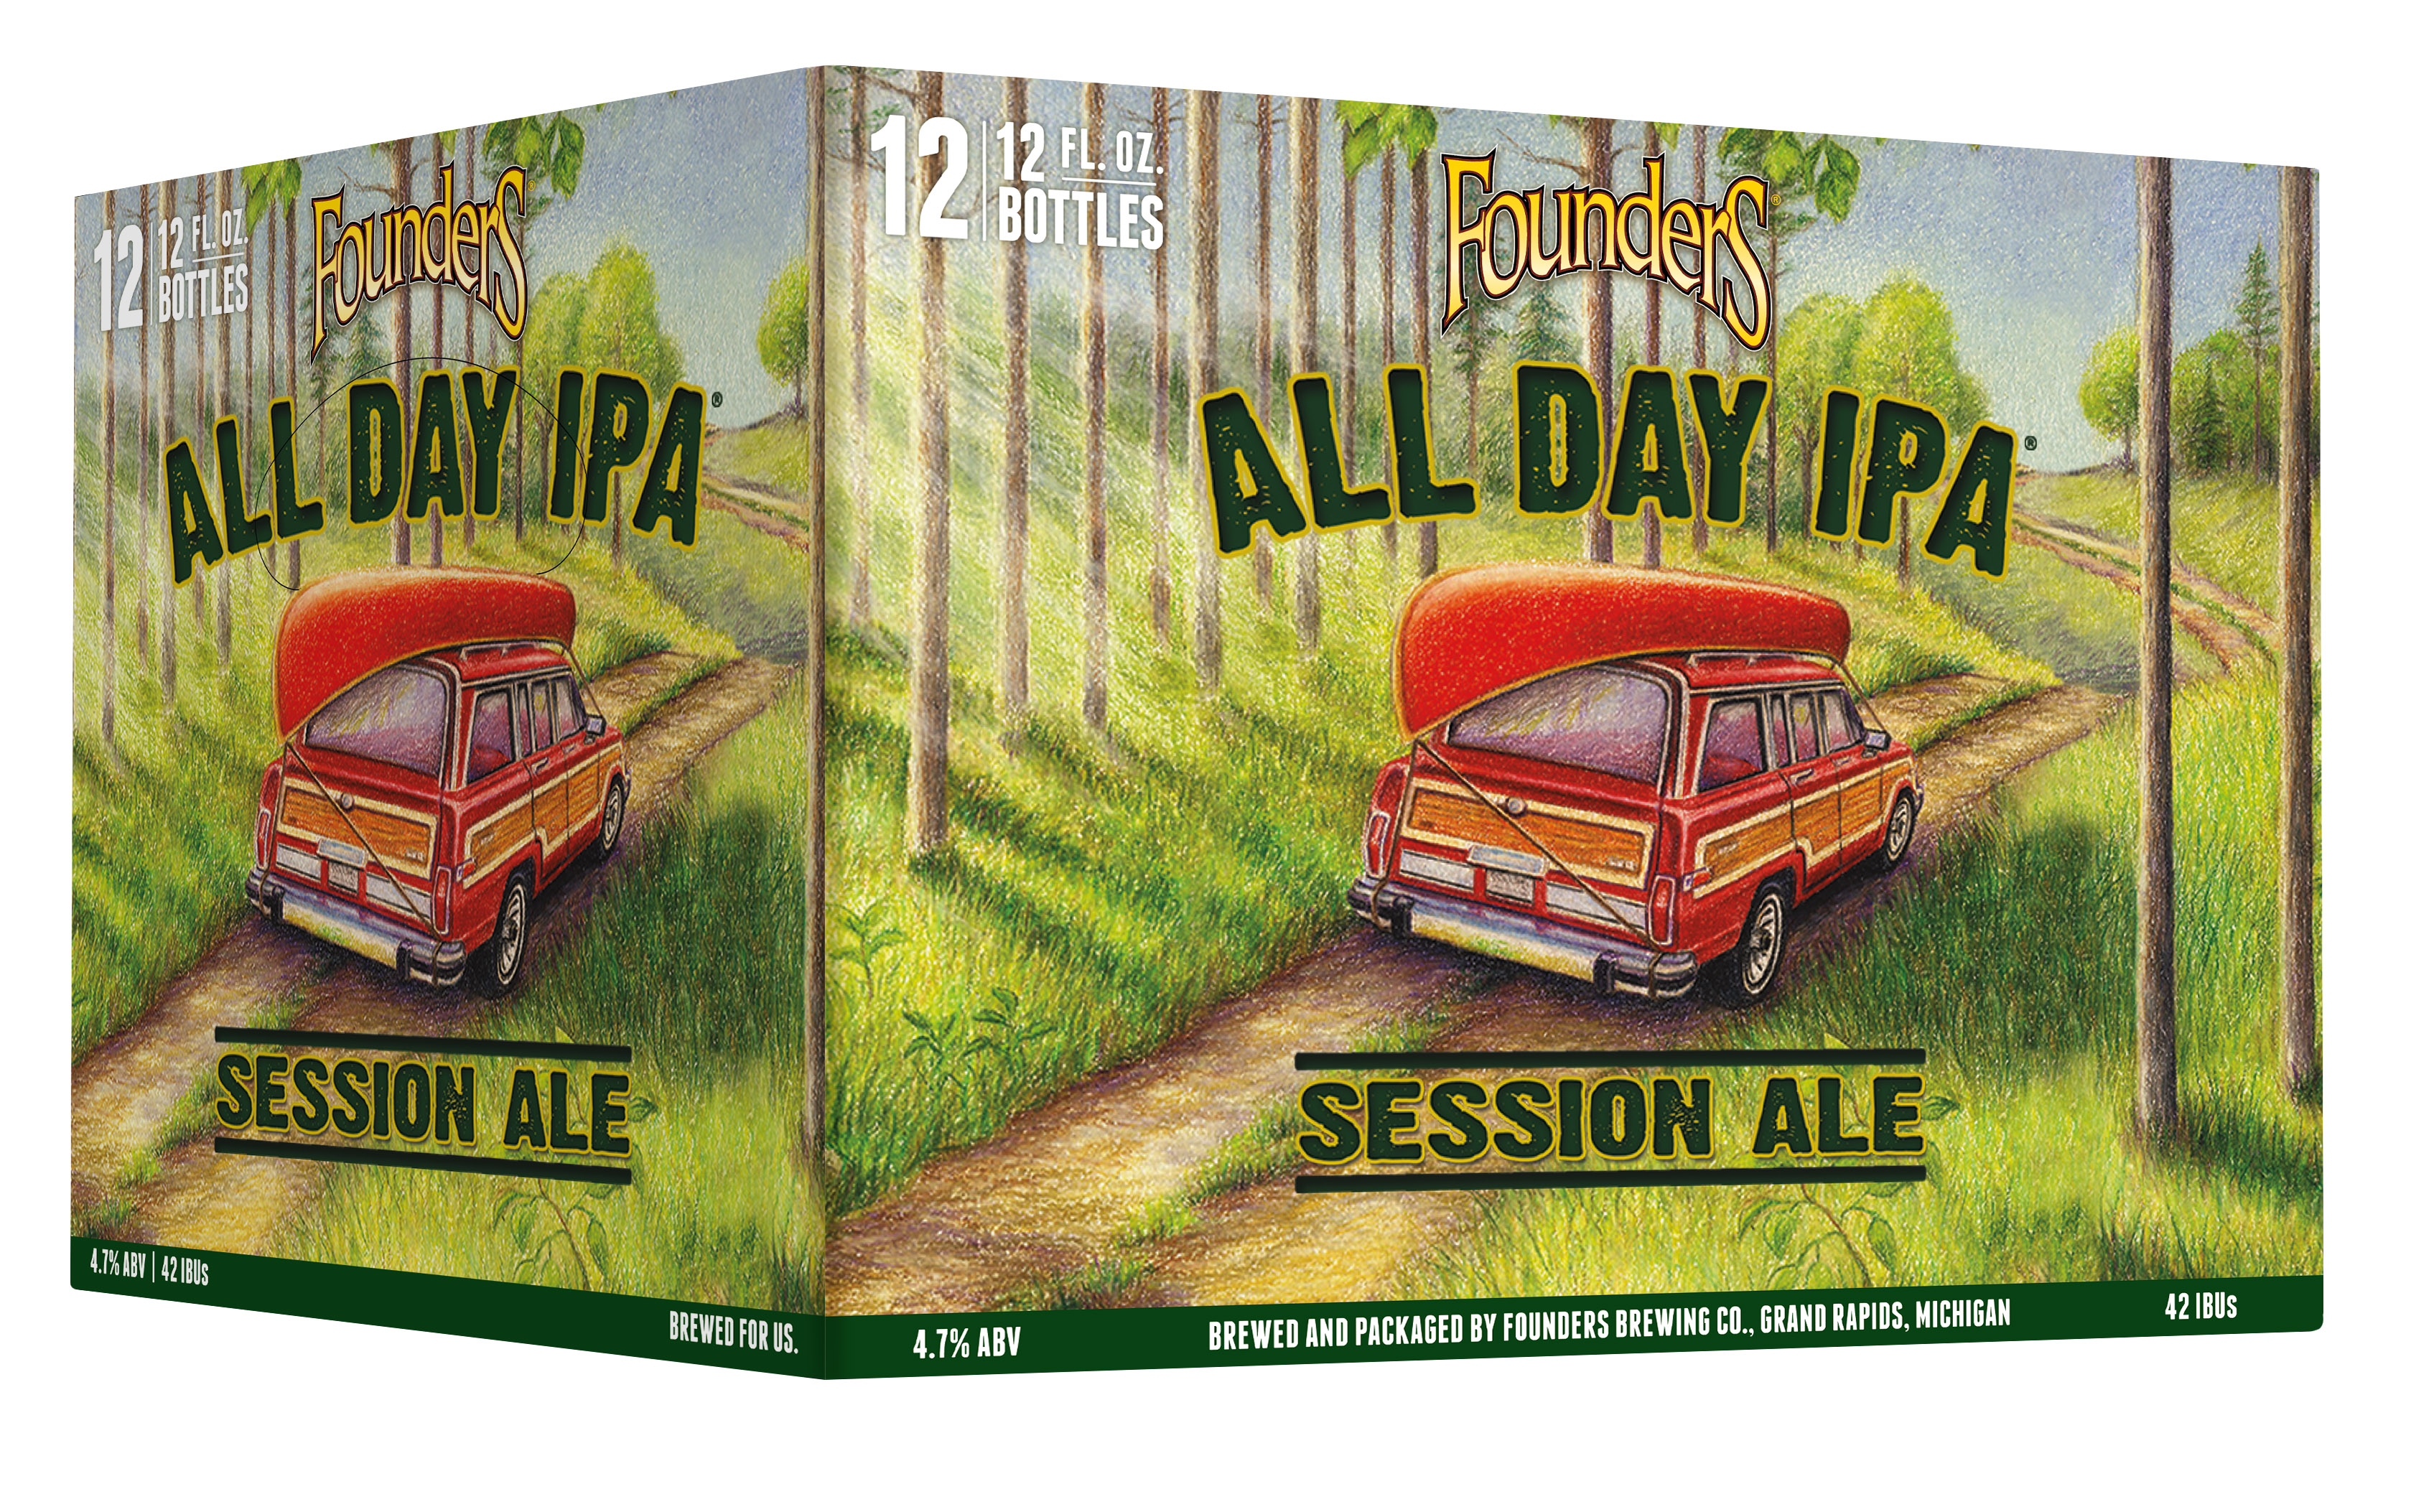 images/beer/IPA BEER/Founders All Day IPA 6pk Cans.jpg